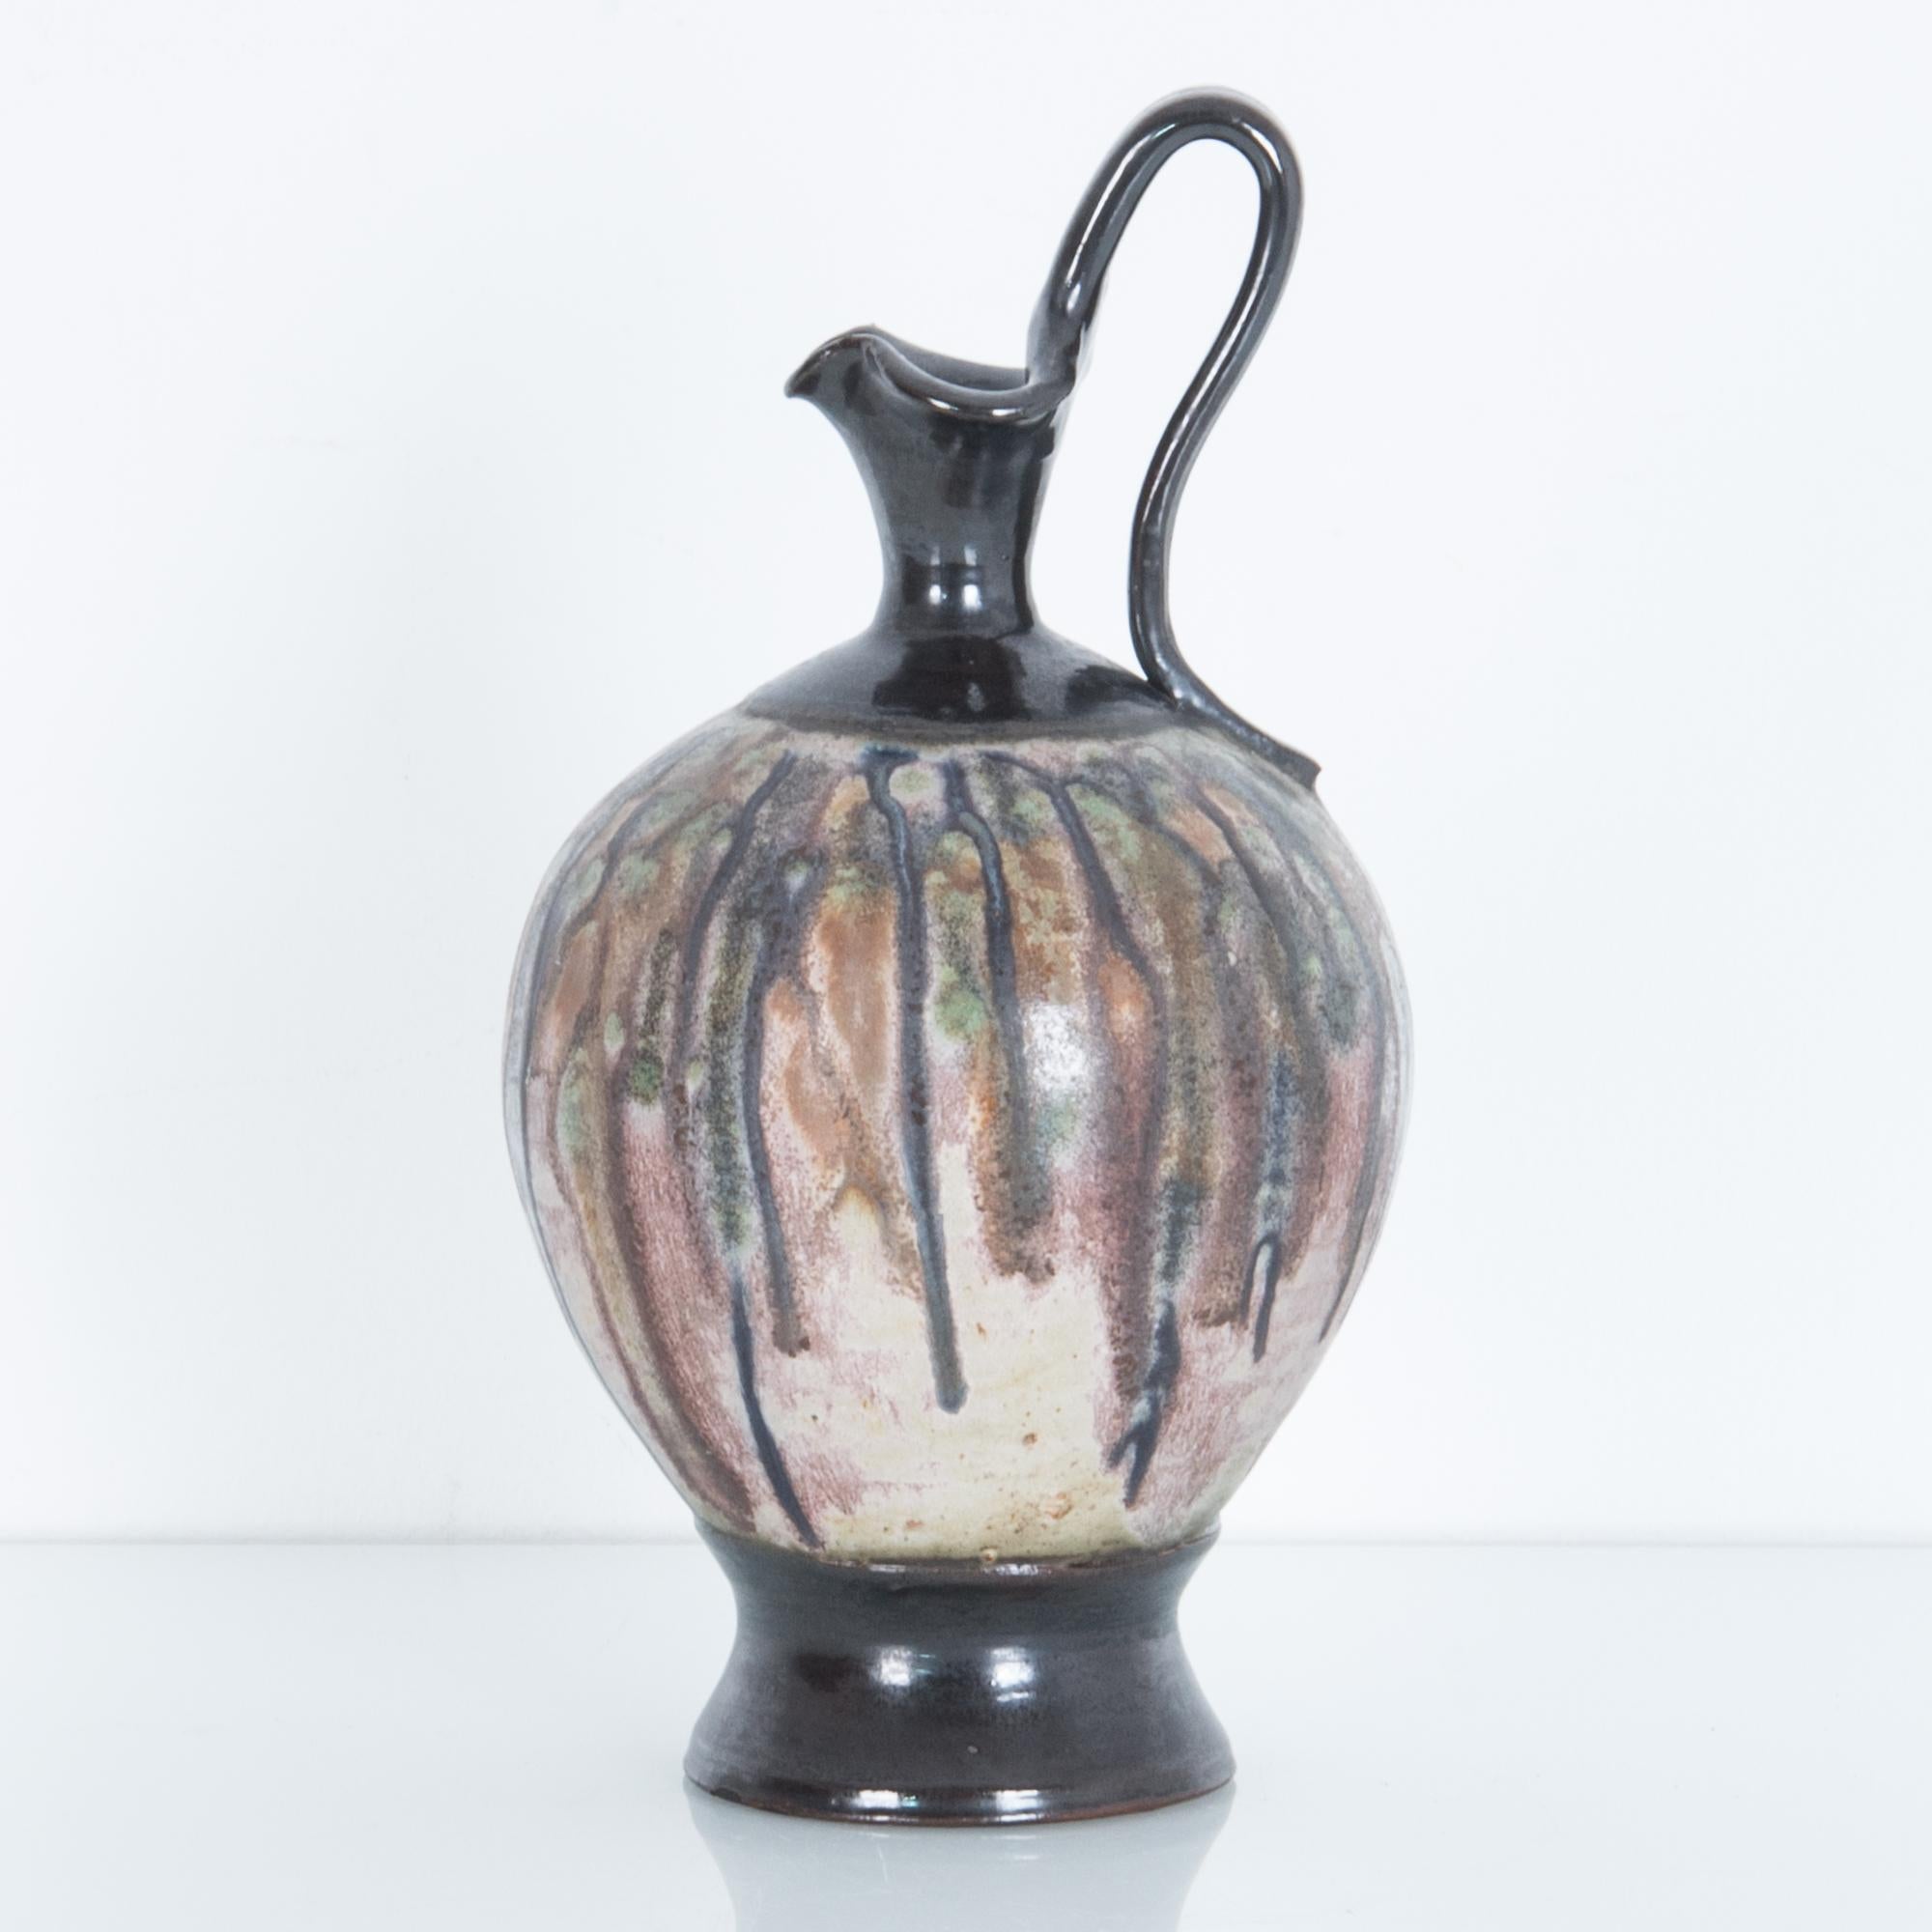 Ceramic stoneware pitcher from Belgium, circa 1950s. These distinctive ceramics pieces were produced in mid-20th century Belgium in the Bouffioulx region. Featuring distinctive graphic textured glazes on simple forms this local style was produced by